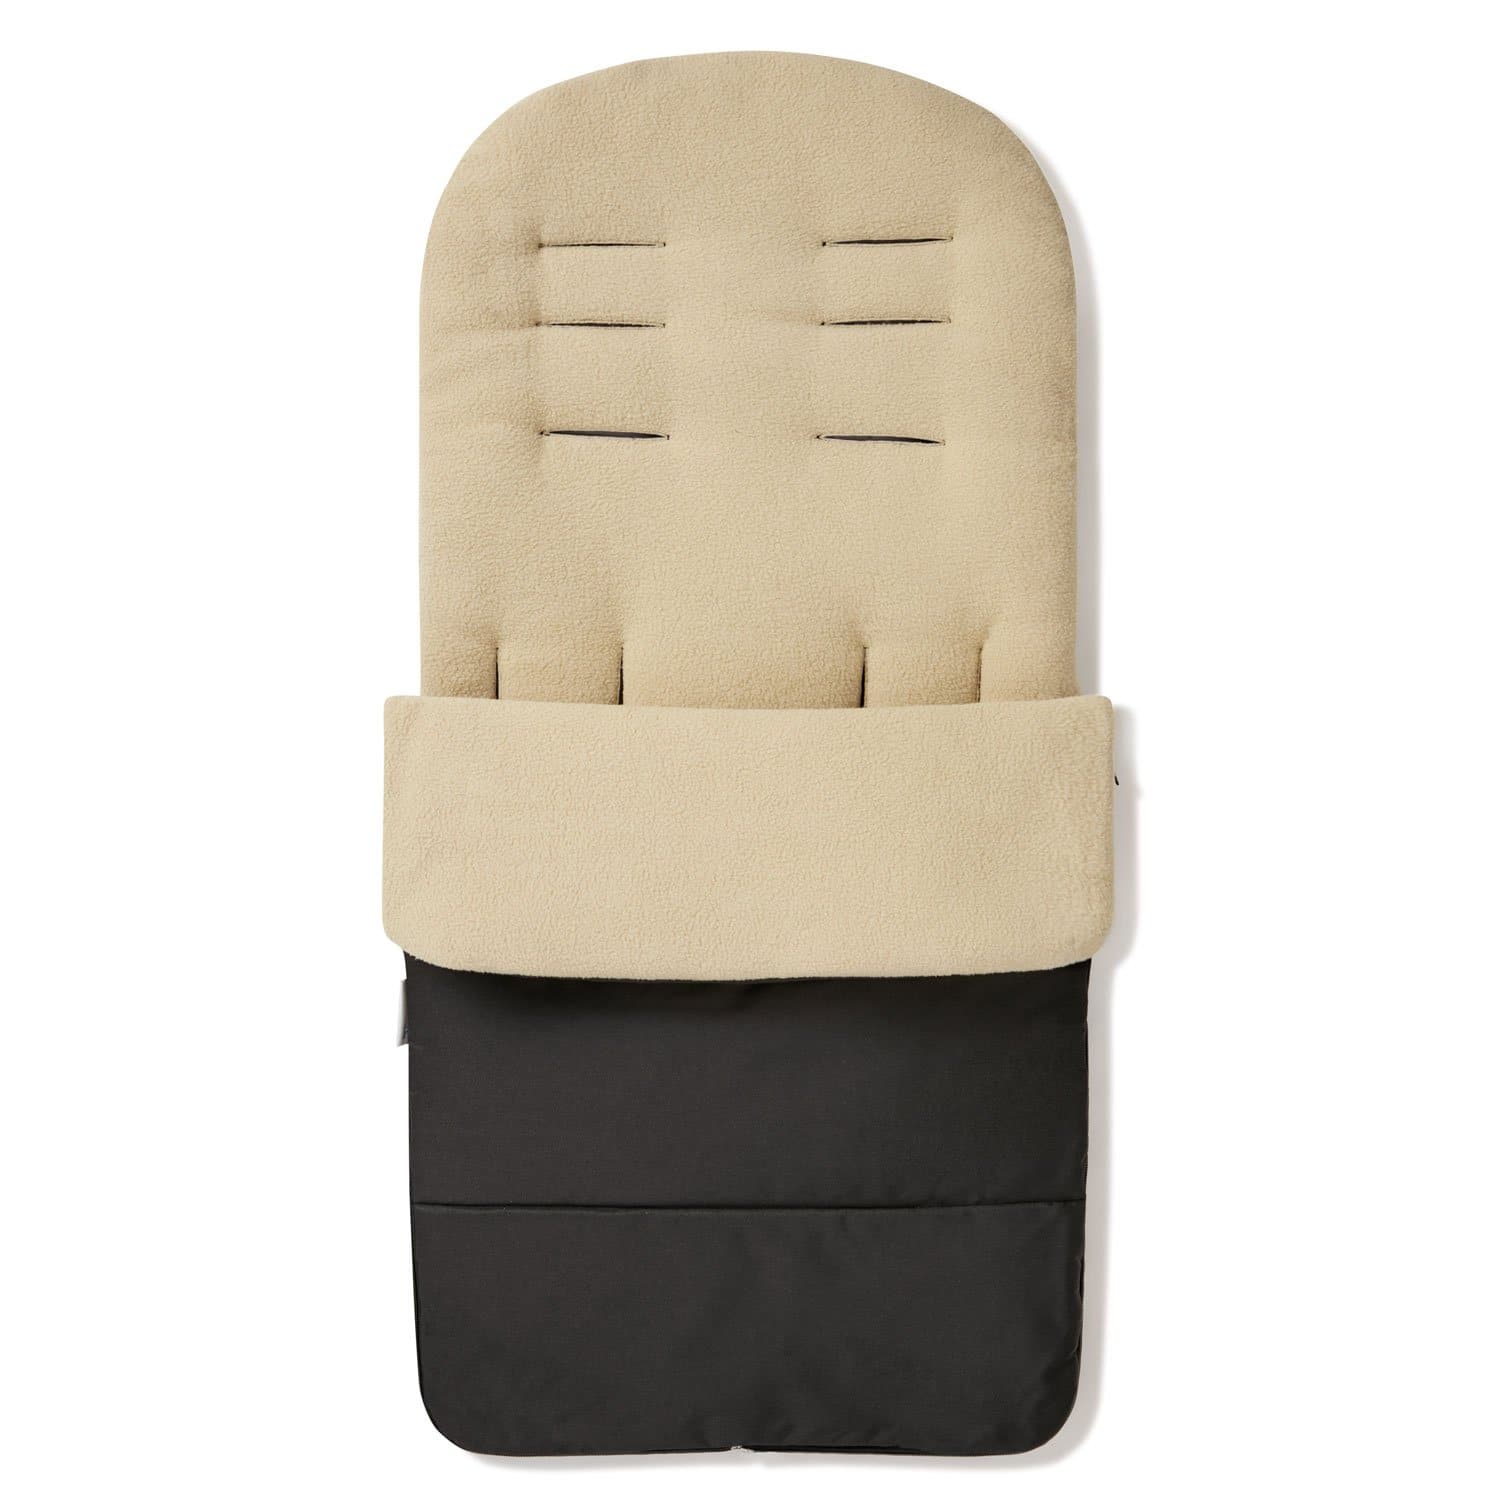 Premium Footmuff / Cosy Toes Compatible with Babywelt - Desert Sand / Fits All Models | For Your Little One